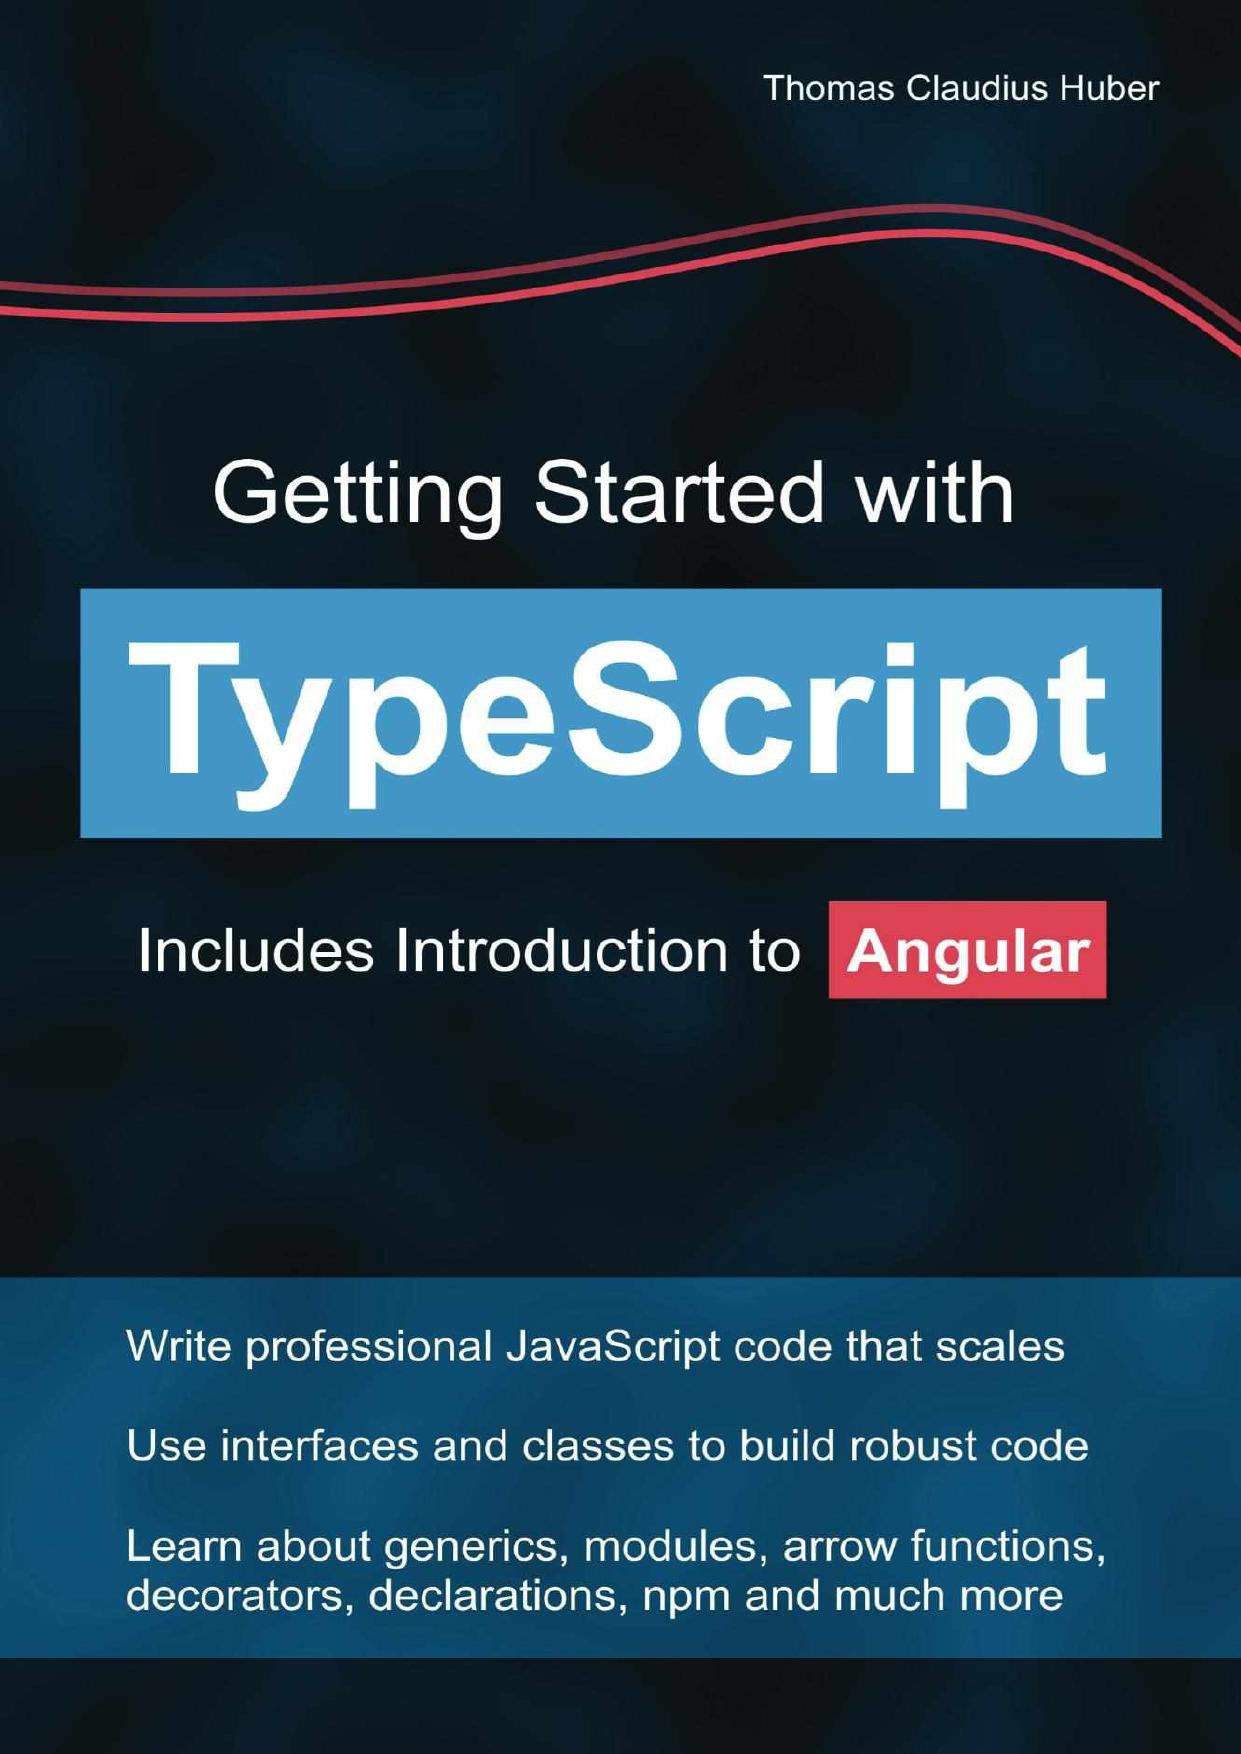 Getting Started With TypeScript: Includes Introduction to Angular. Write Professional JavaScript Code That Scales, Use Interfaces and Classes to Build Robust Code, Learn About Generics, Modules, Arrow Functions, Decorators, Declarations, Npm and Much More